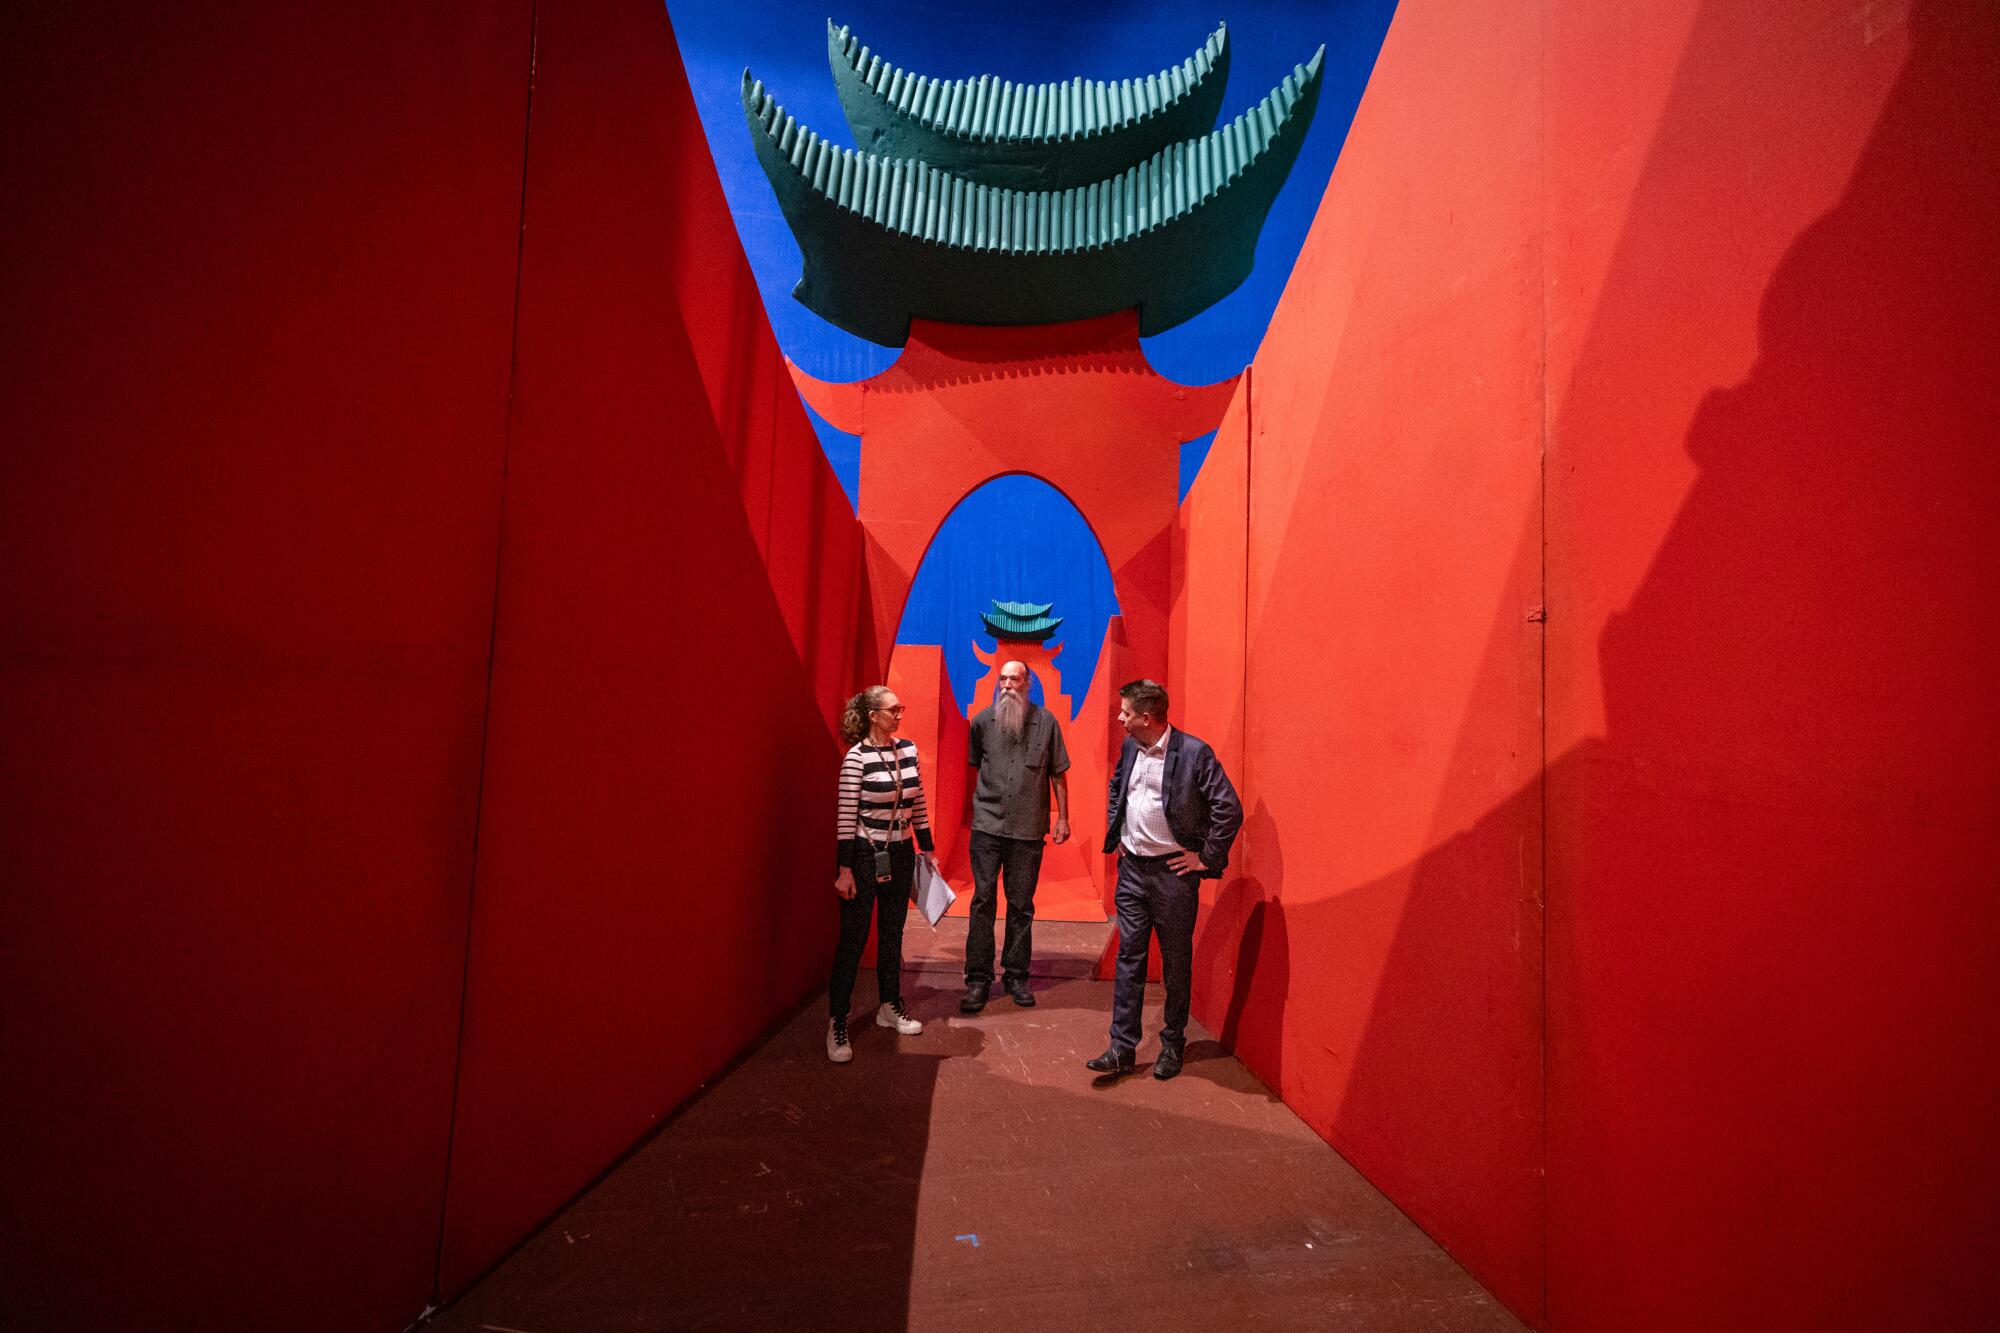 A woman and two men in street clothes talk in front of the mammoth red walls of David Hockney's set for "Turandot."